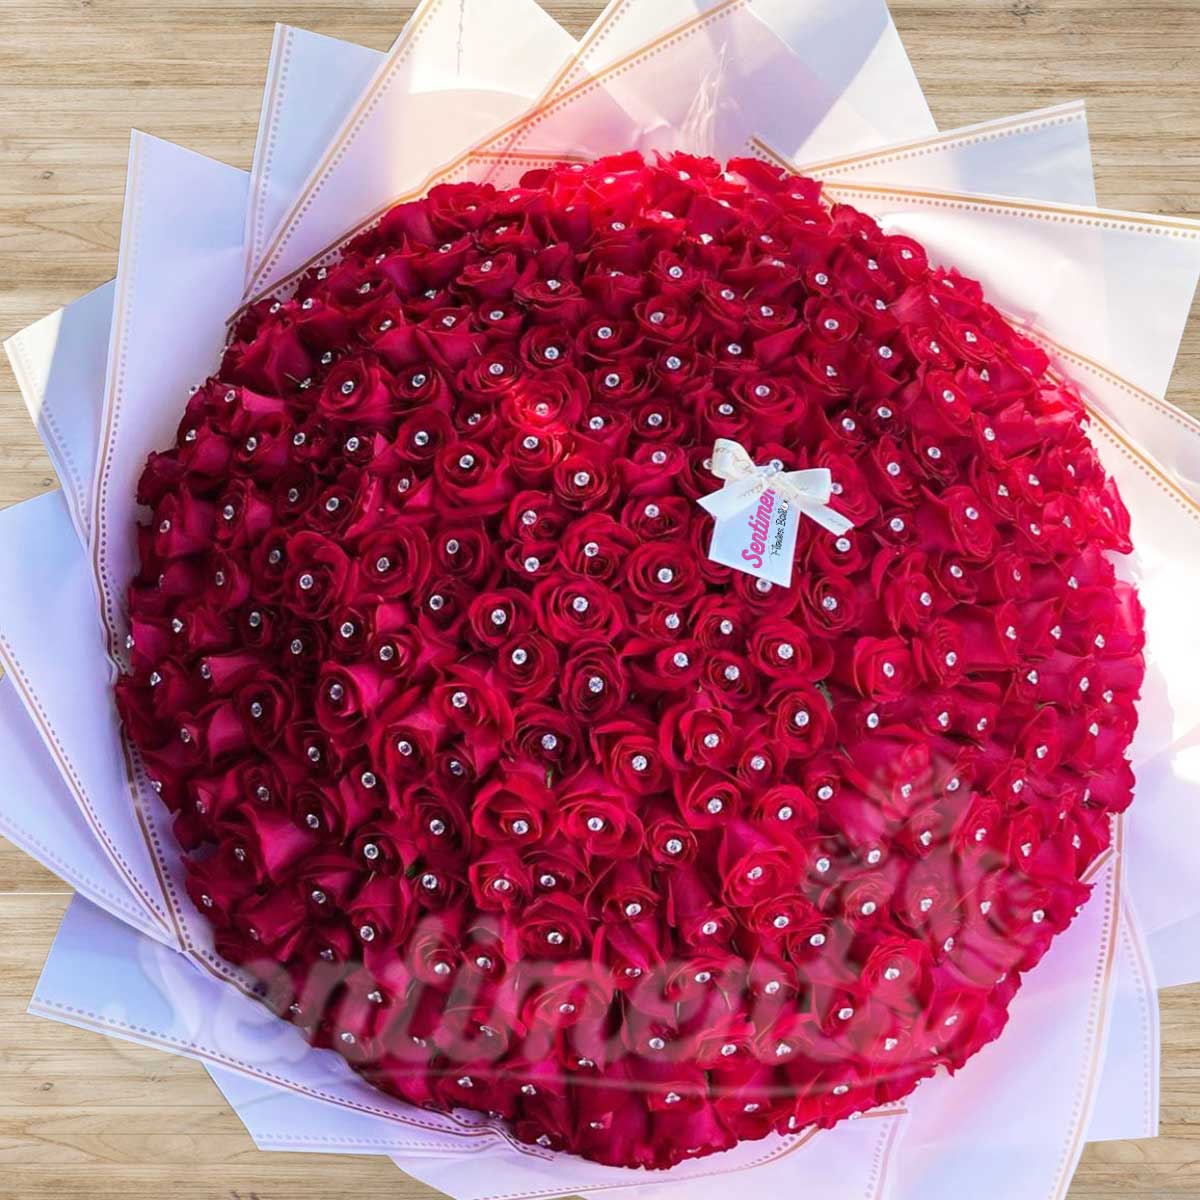 Exclusively Red Roses BIG Hand Bouquet (GEMS/CYSTAL not included)